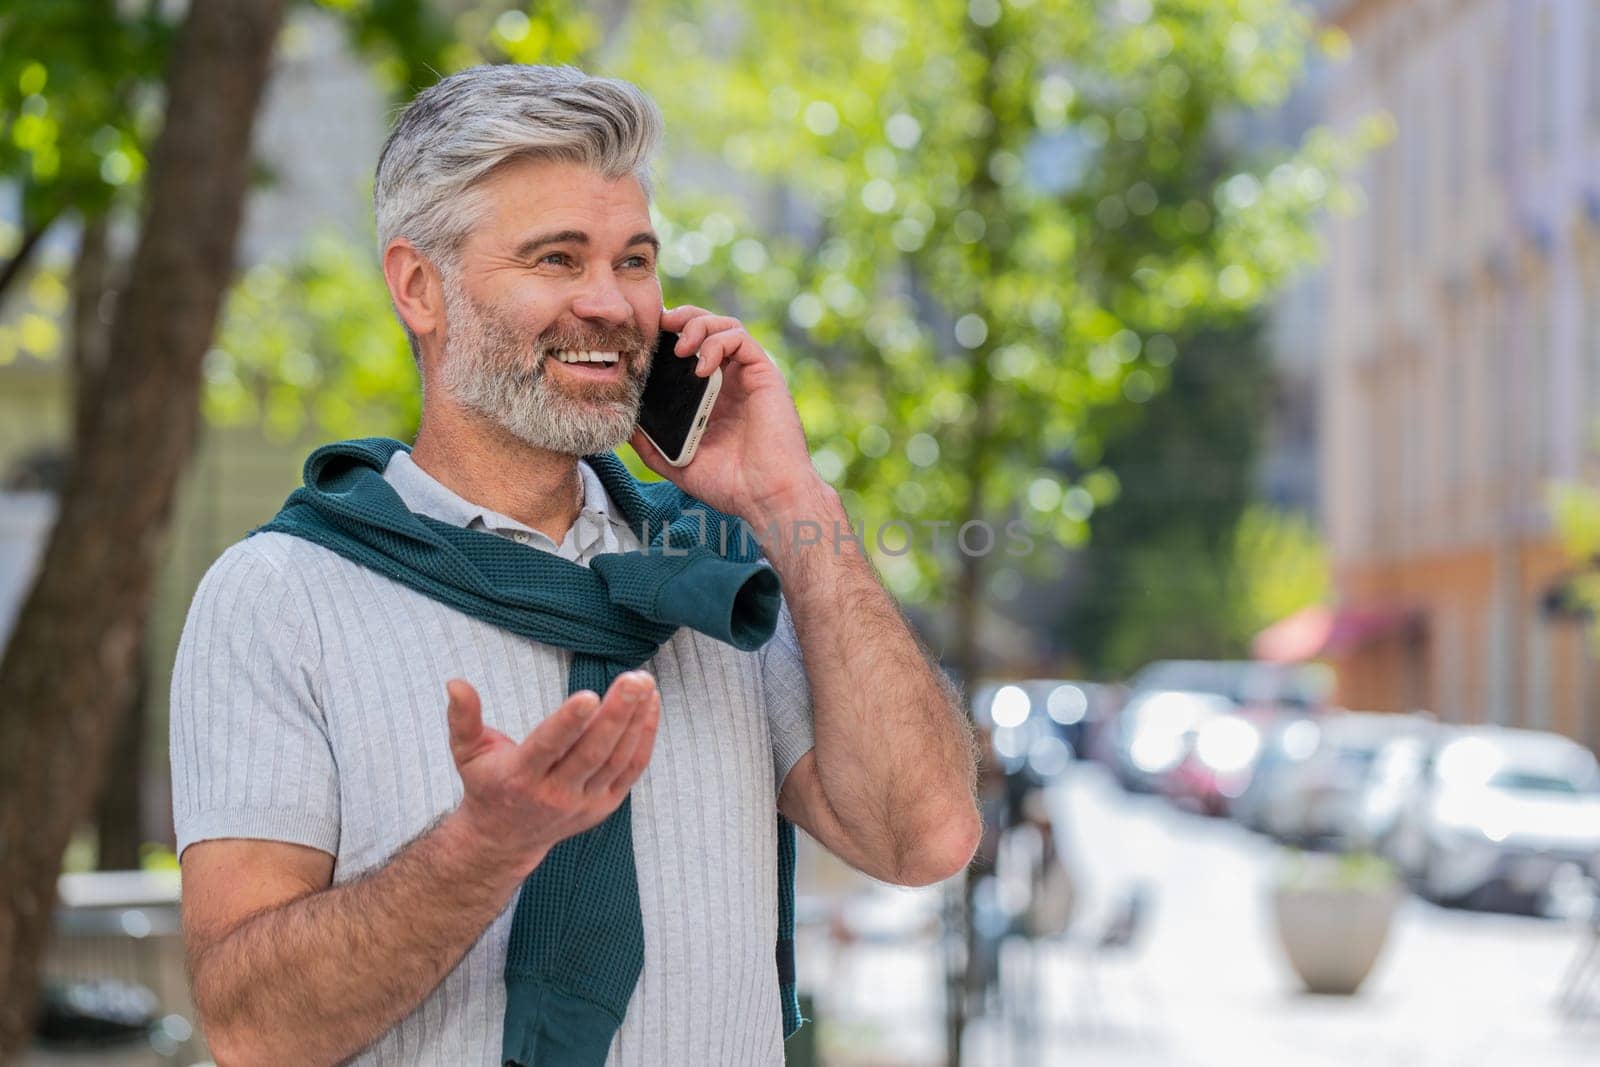 Bearded mature man tourist having remote conversation communicate speaking by smartphone with friend talking on phone unexpected good news gossip on urban city street. Town lifestyles outdoors.